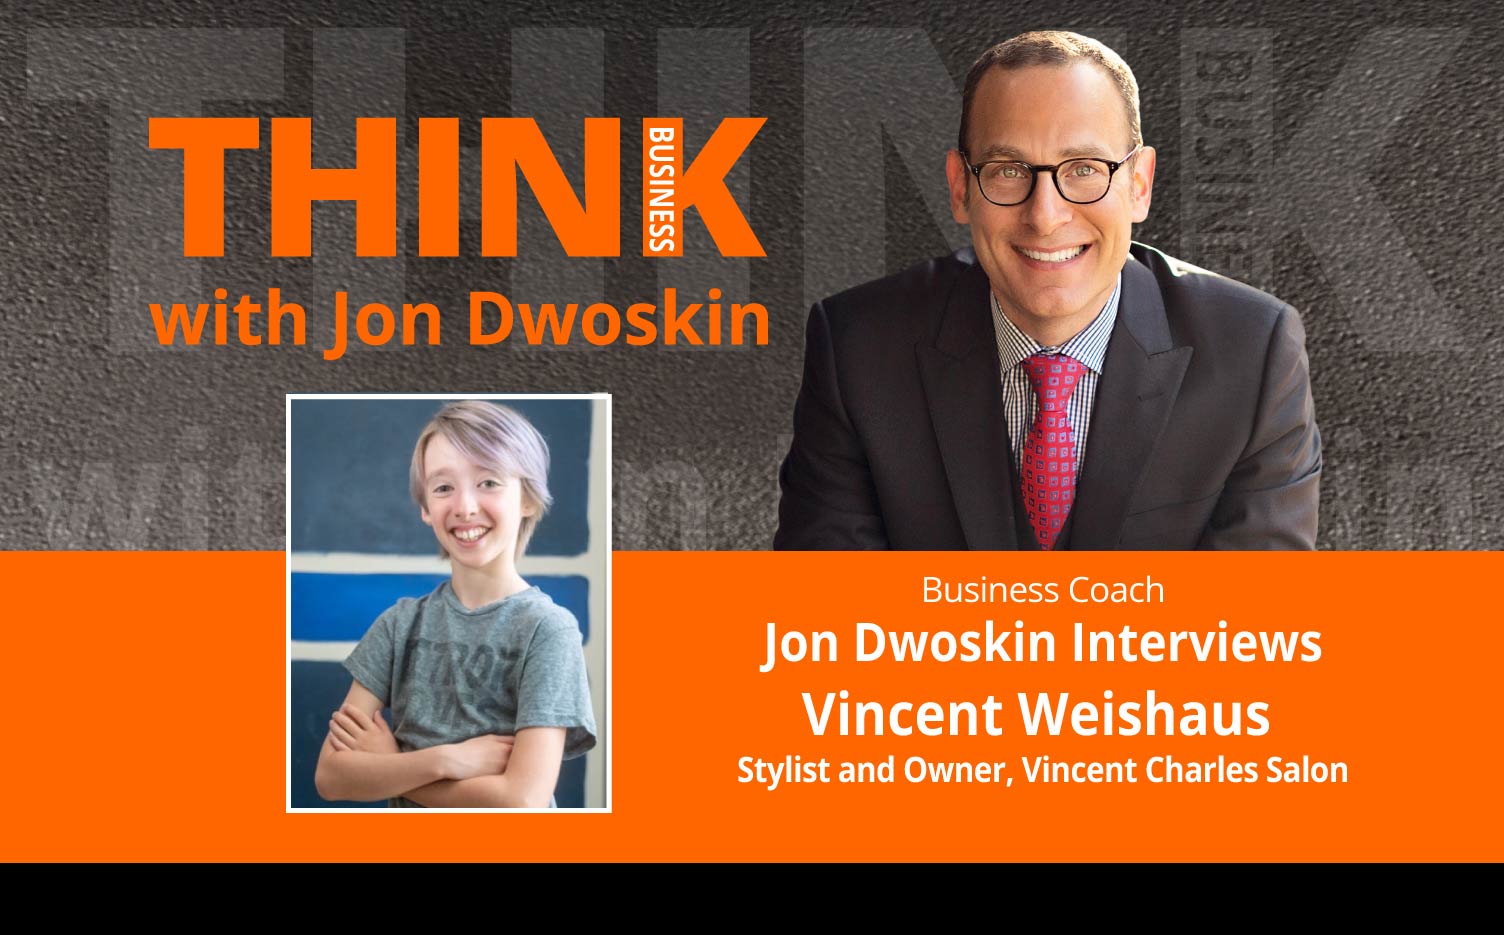 THINK Business Podcast: Jon Dwoskin Interviews Vincent Weishaus, Stylist and Owner, Vincent Charles Salon